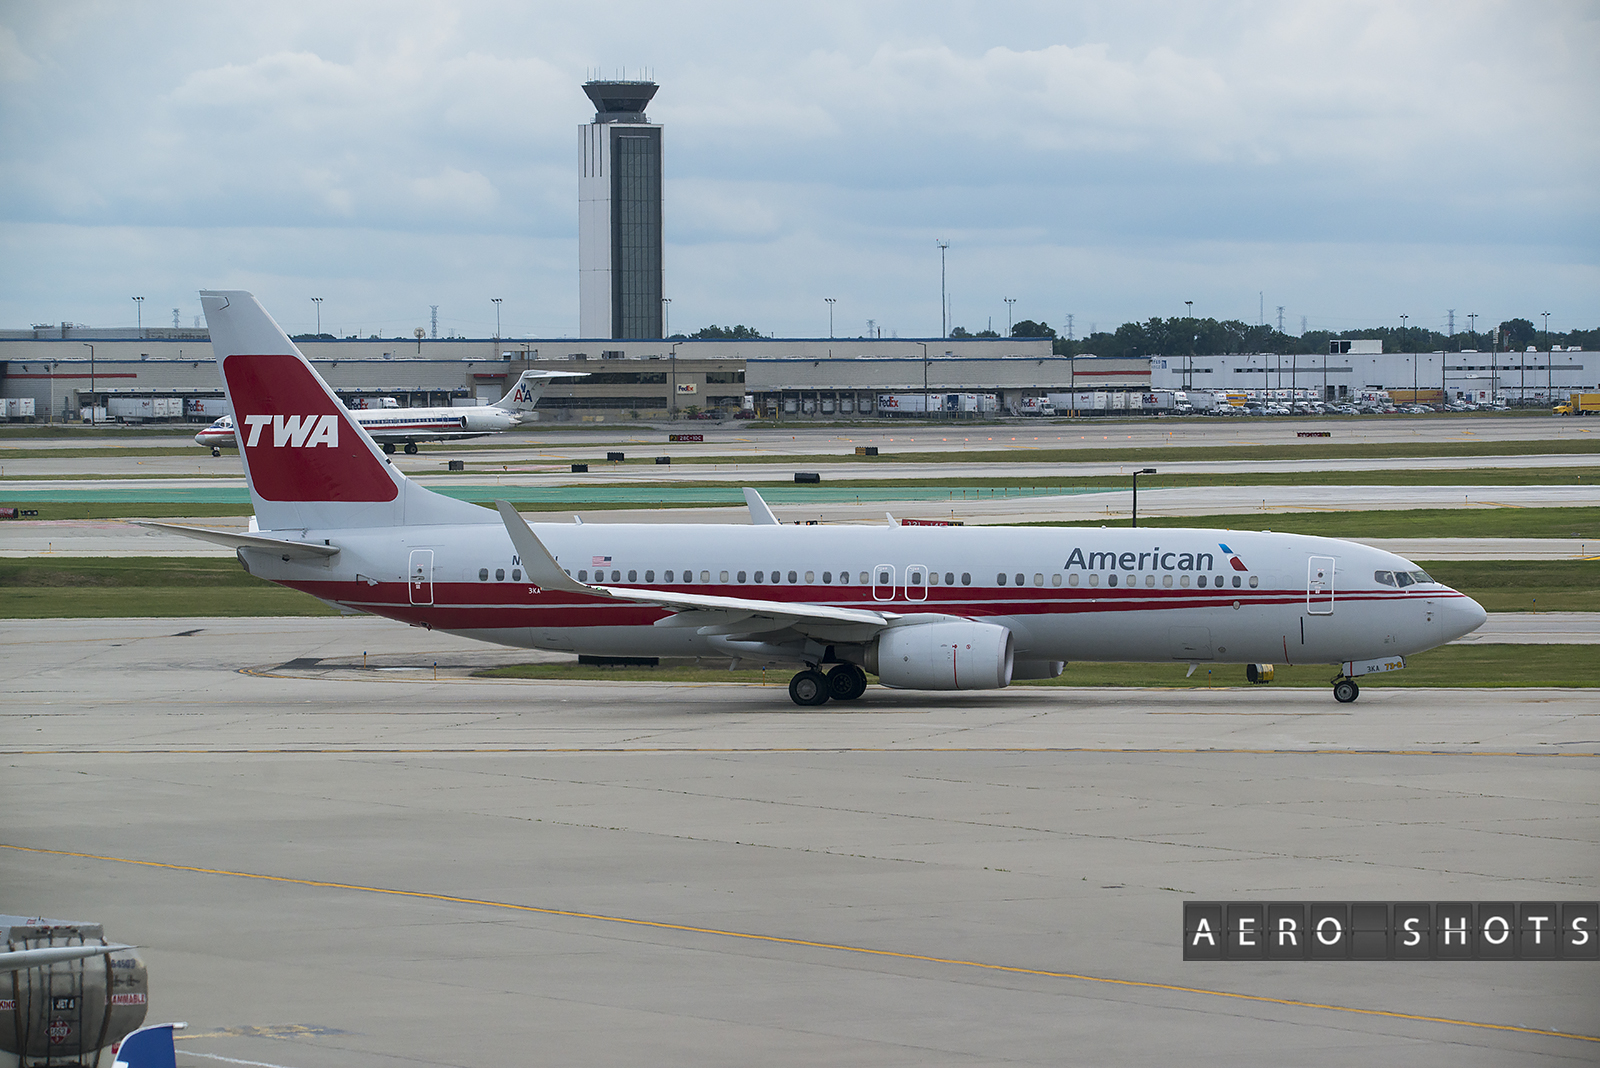 Though not a heavy, when's the last time that you've seen a TWA livery?